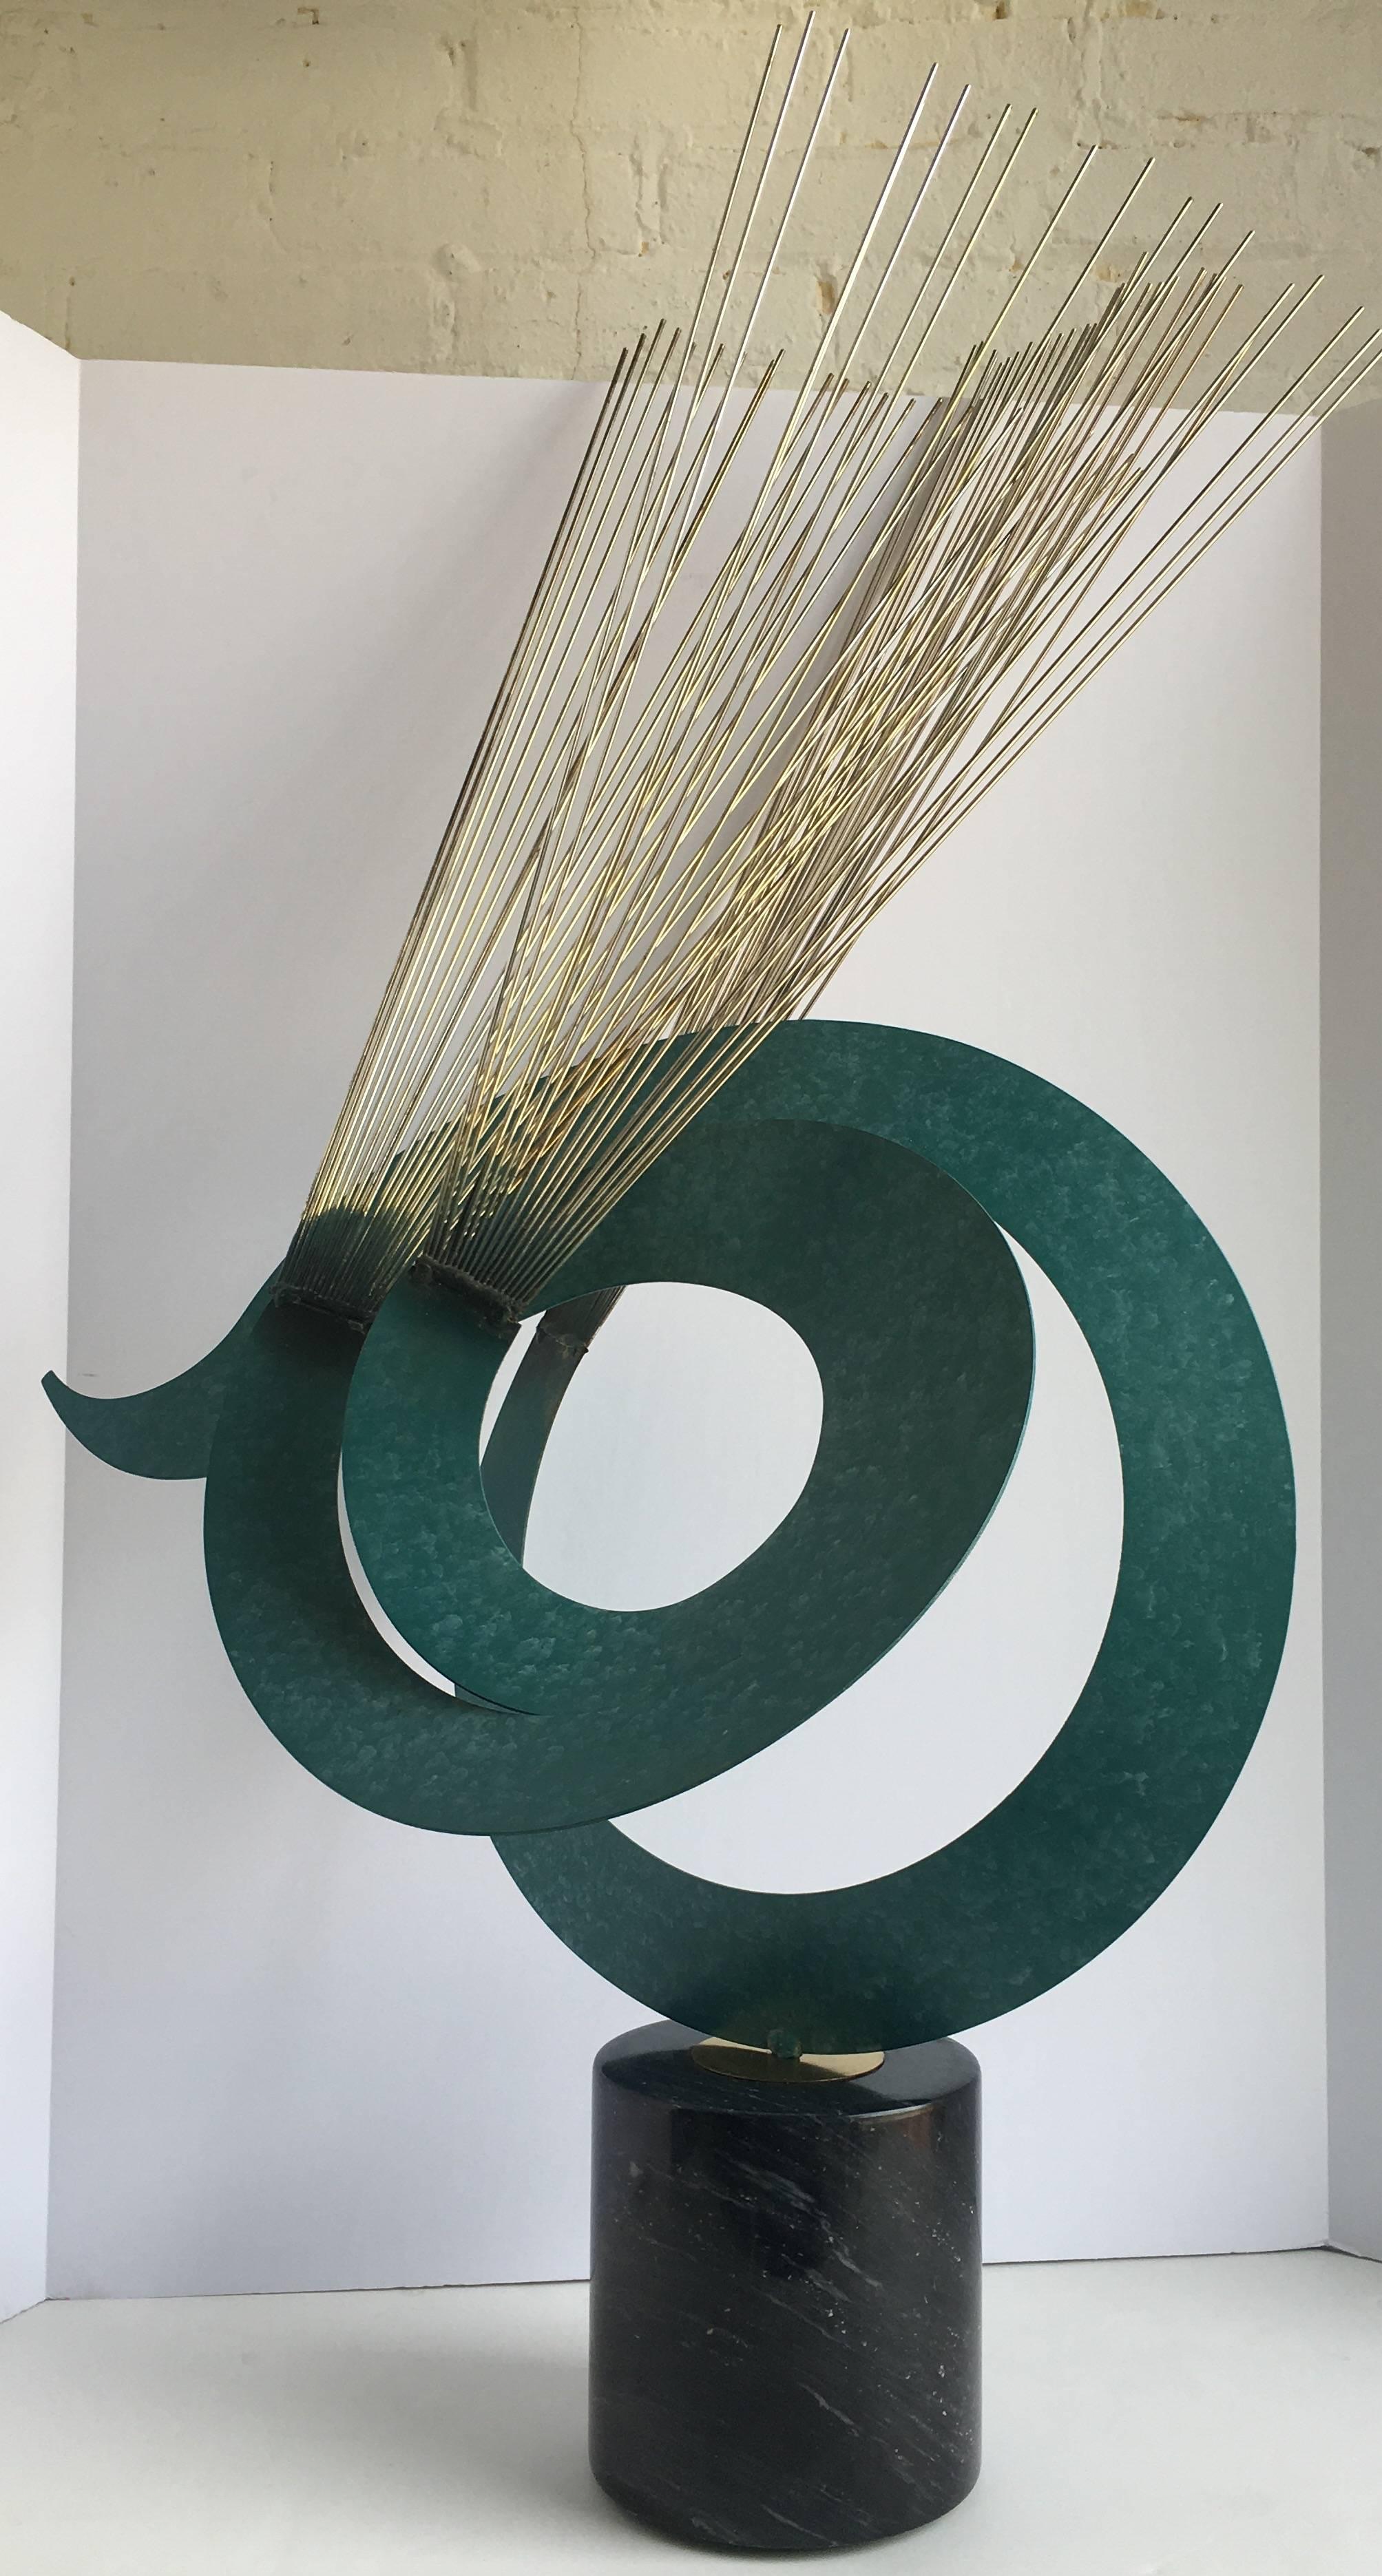 Dramatic modern abstract table sculpture featuring a curvaceous turquoise metal wave design with tubular brass rod sprays. Polished marble base. Signed and dated, 1980.